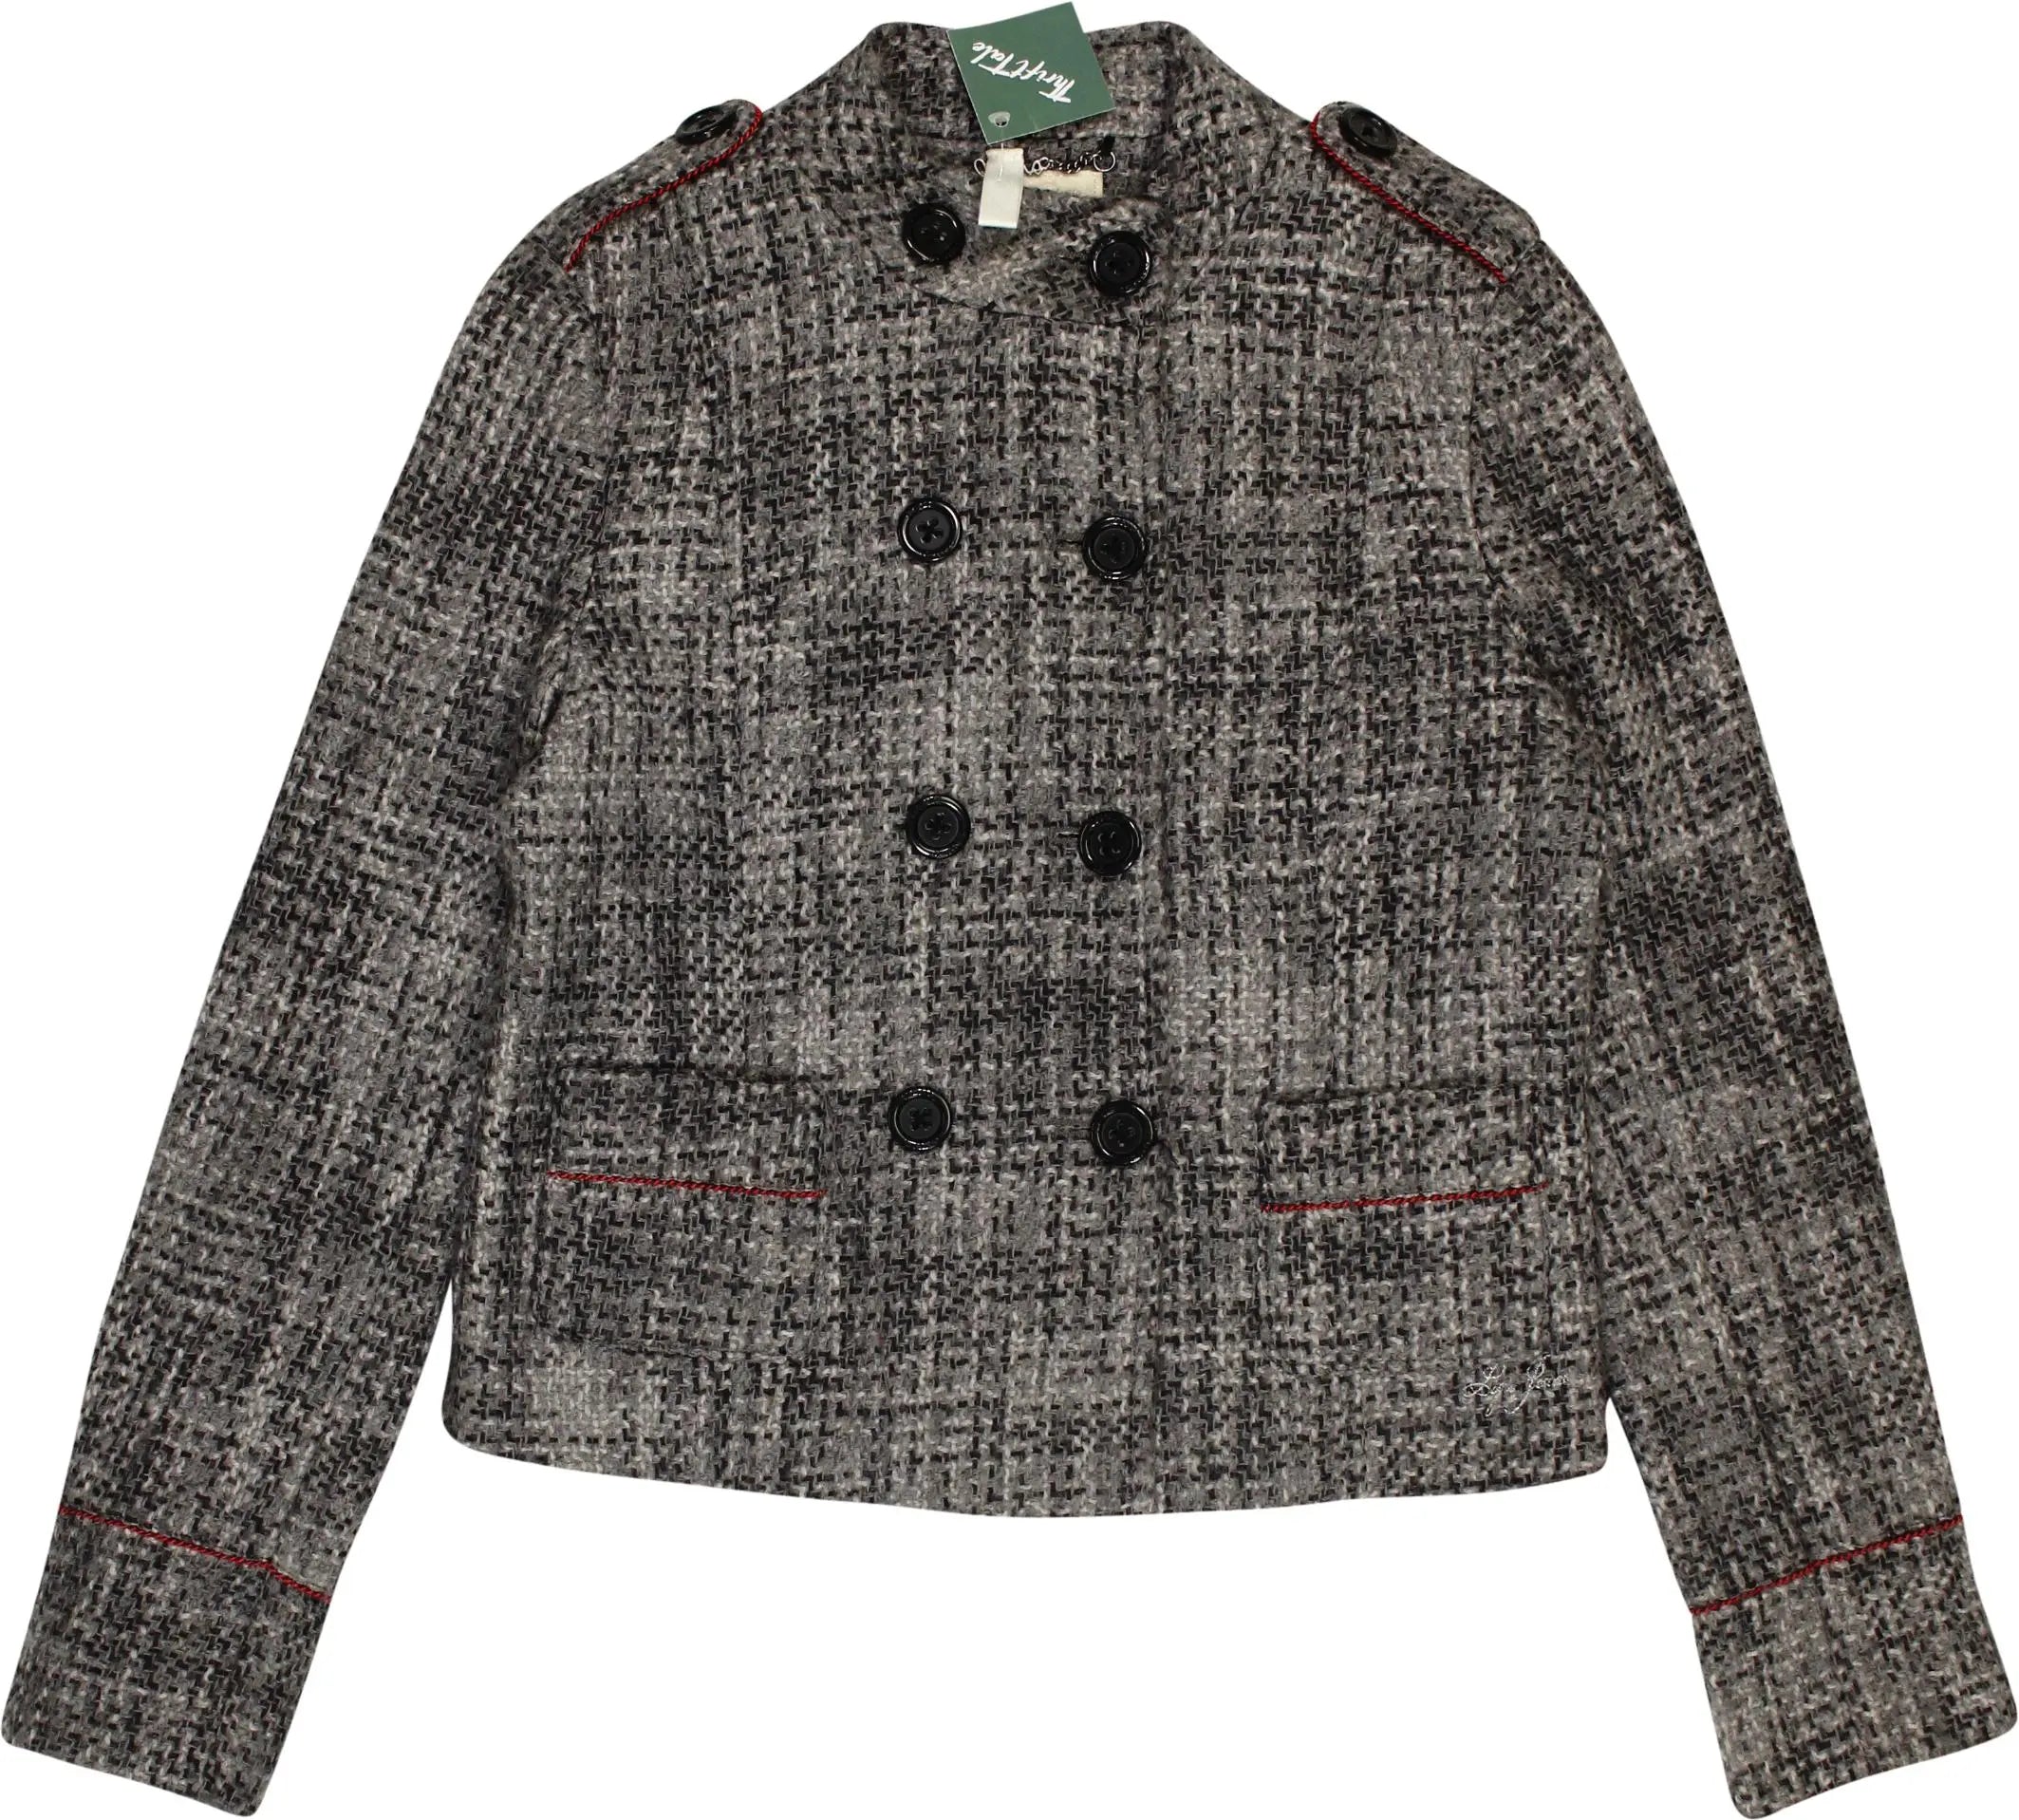 Pepe Jeans - Grey Wool Blend Jacket by Pepe Jeans- ThriftTale.com - Vintage and second handclothing